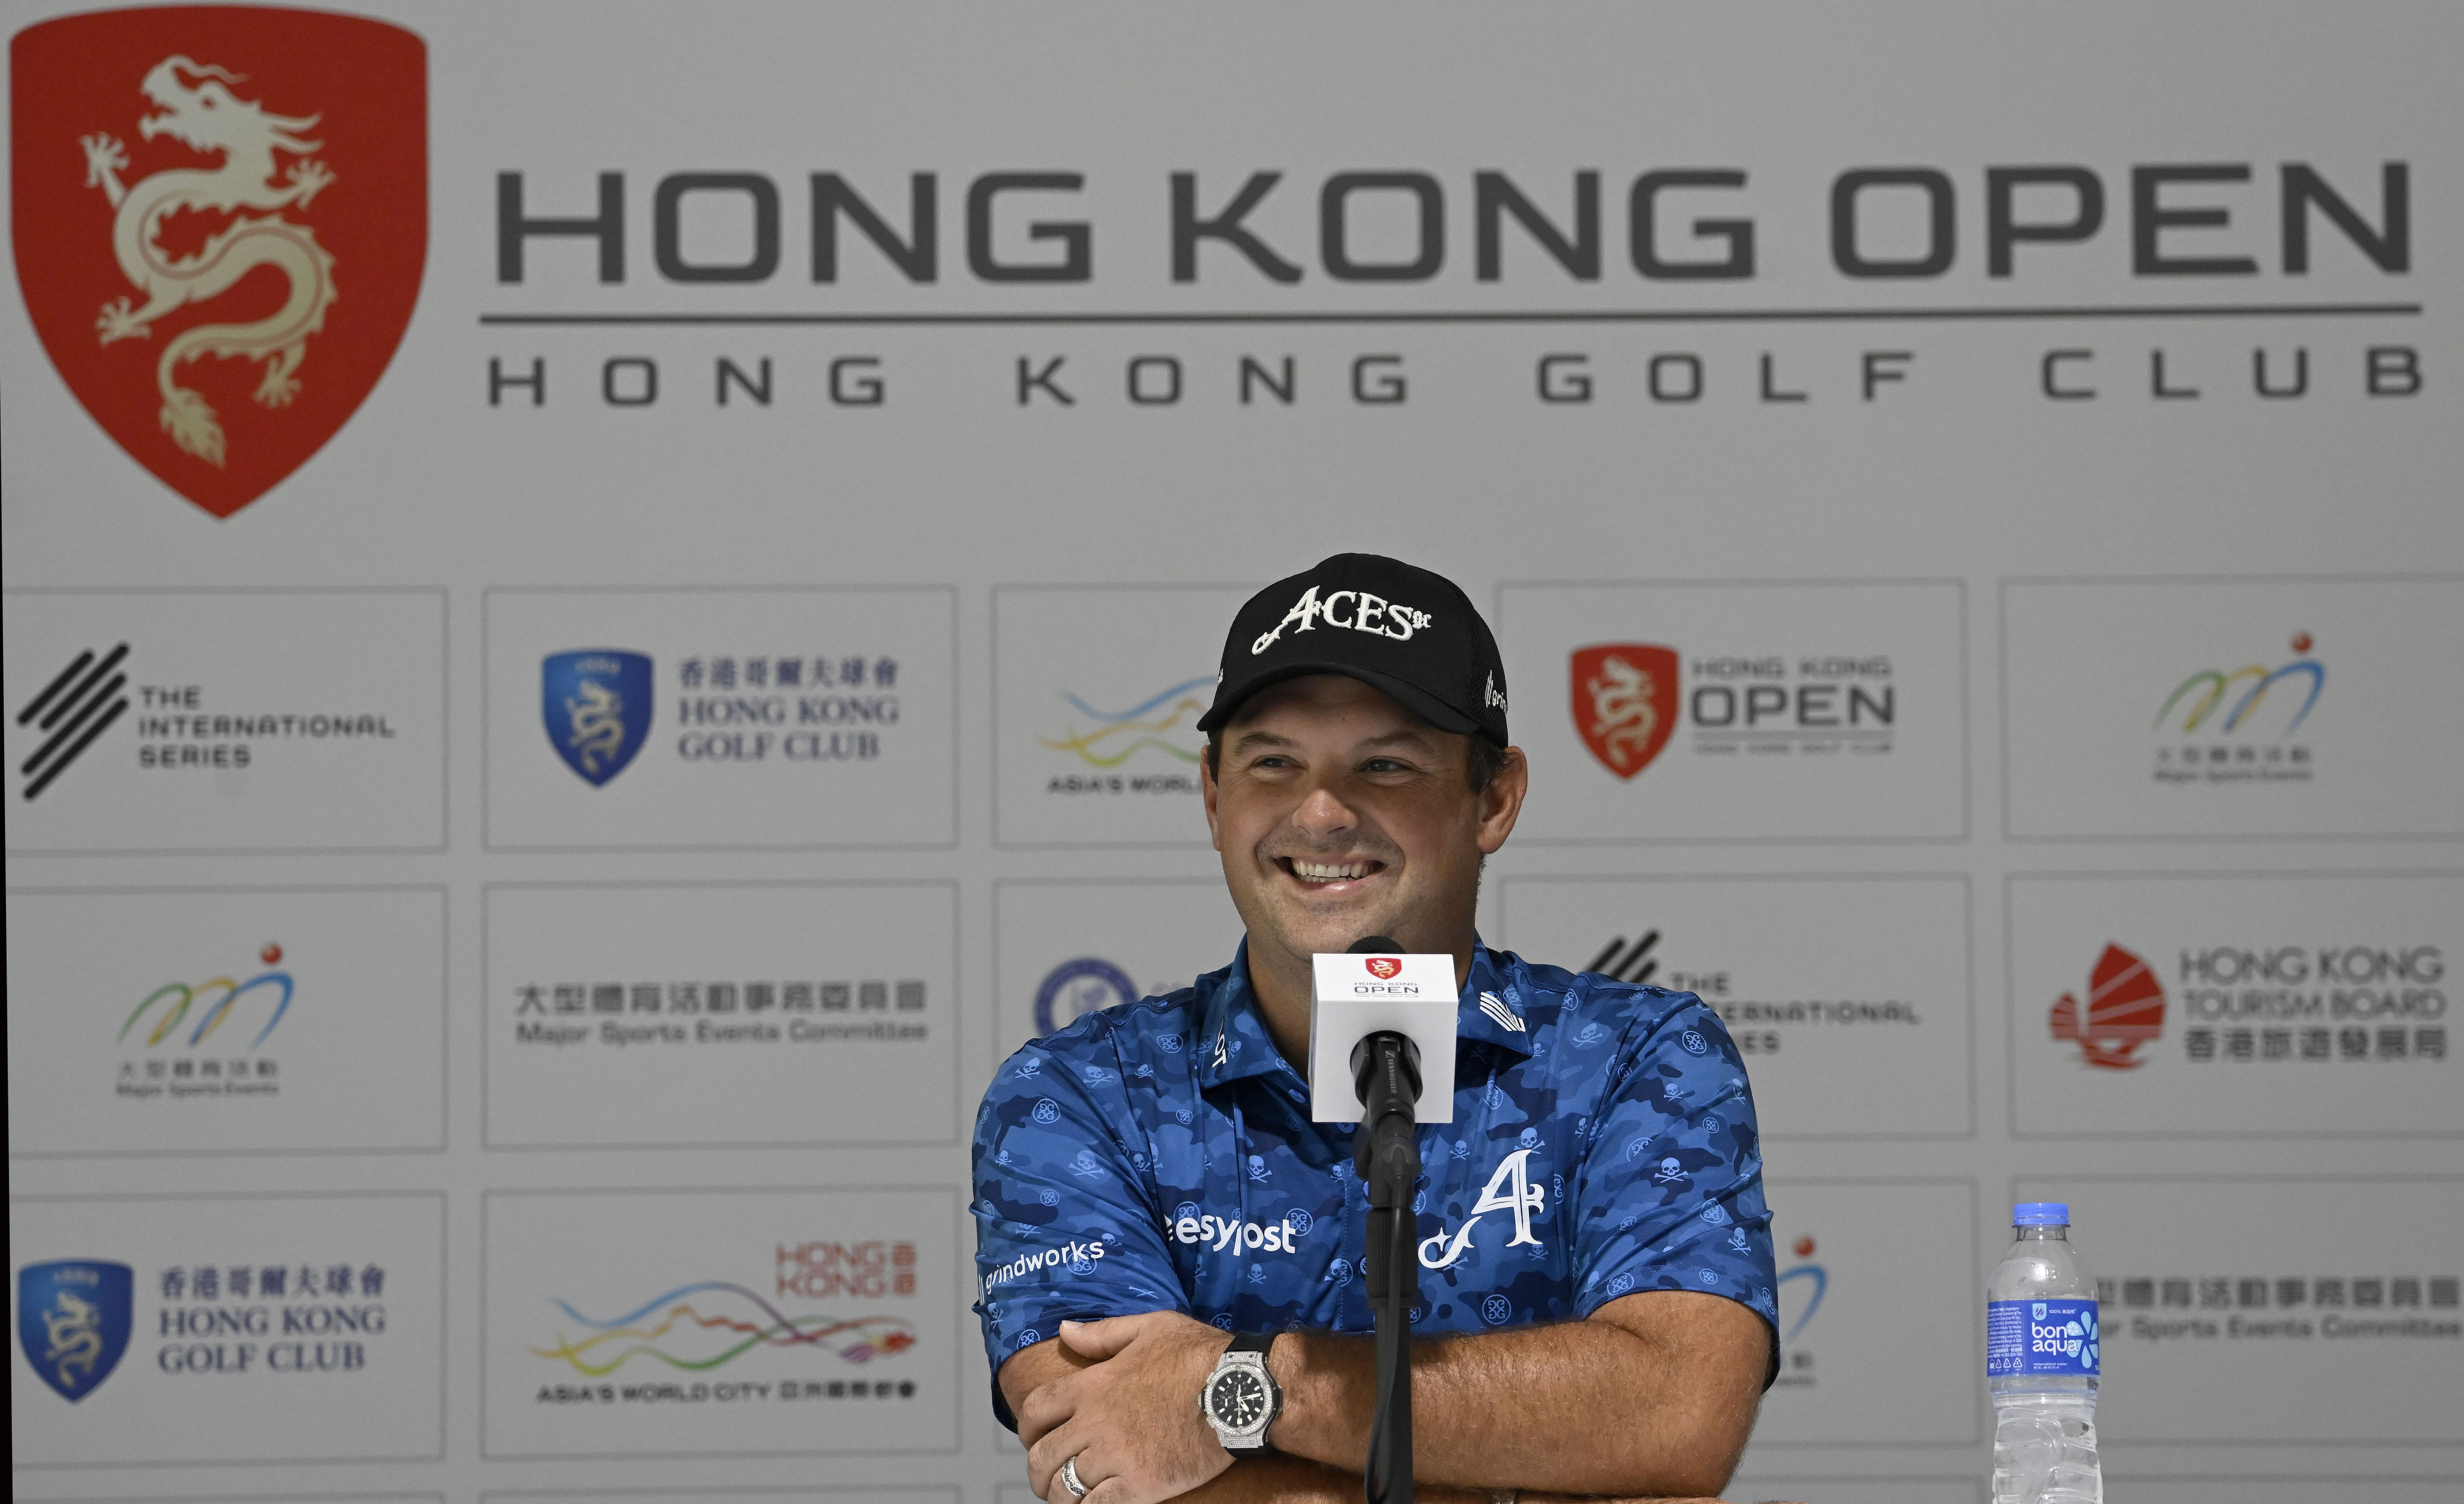 Patrick Reed chats to the press ahead of the Hong Kong Open. Photo: Asian Tour